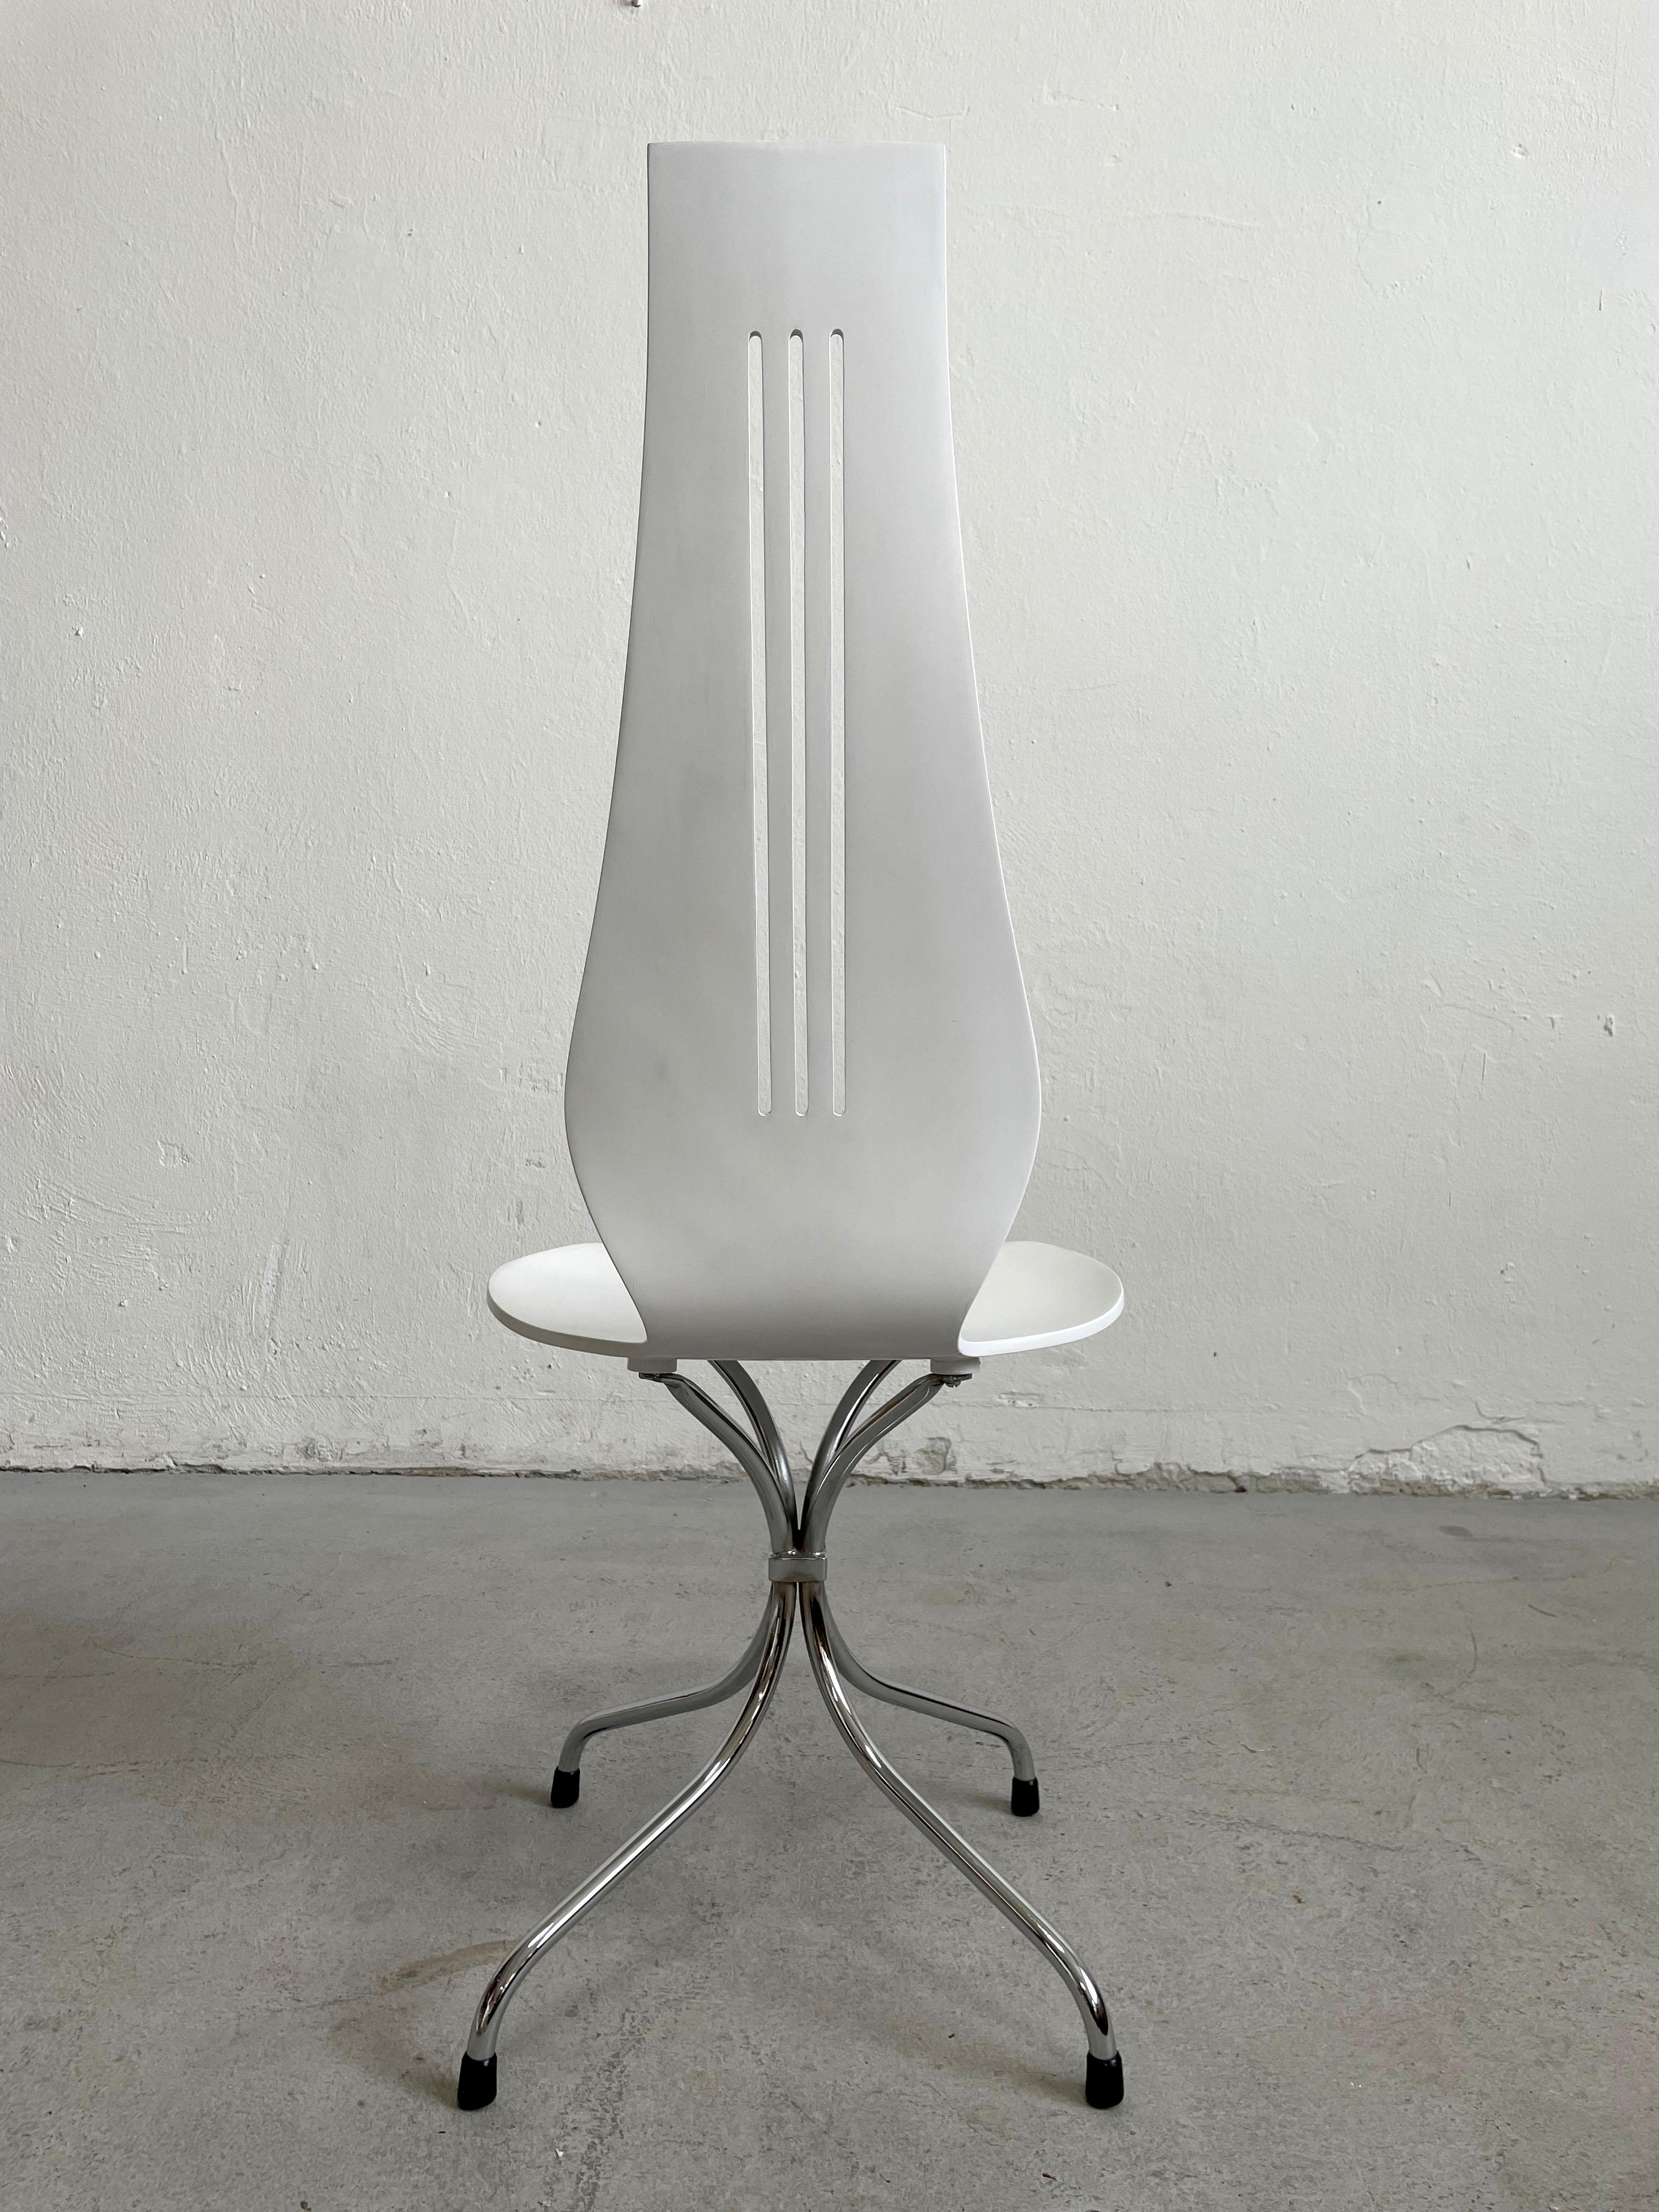 Set of 6 Mid-Century Modern White Dining Chairs by Theo Häberli 1960 Switzerland For Sale 1